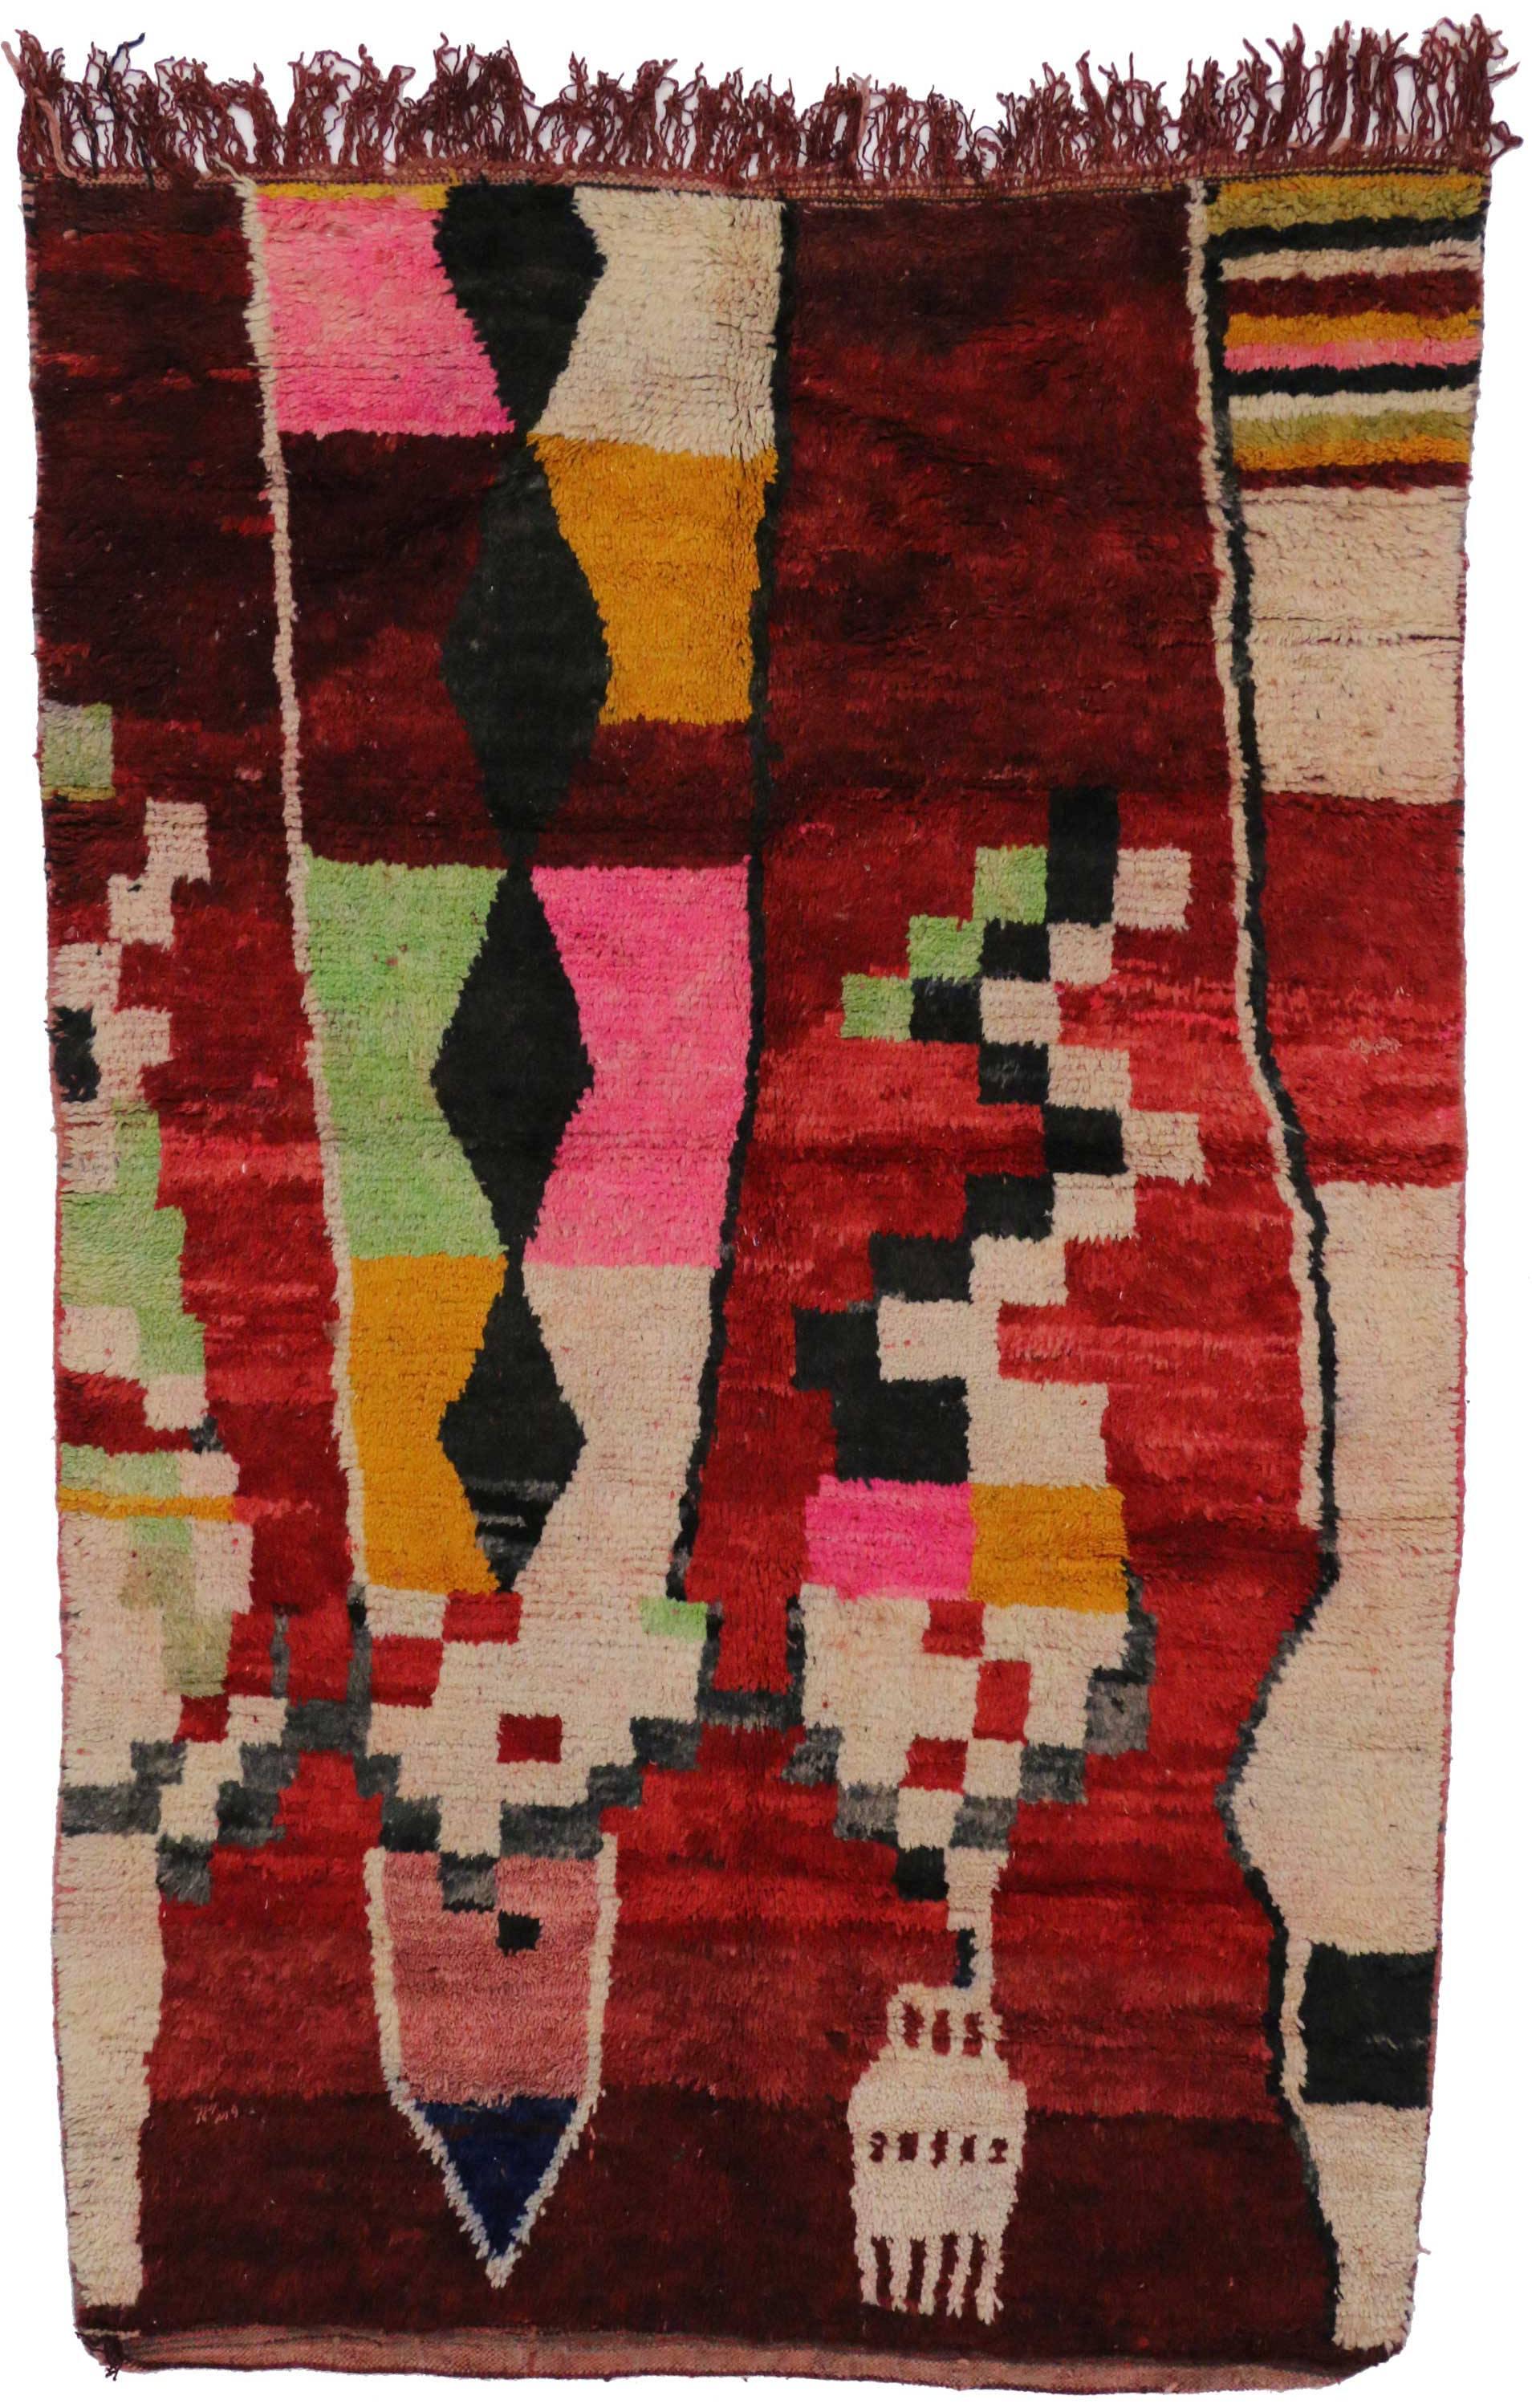 Contemporary Berber Moroccan Rehamna Rug with Post-Modern Expressionist Style 1